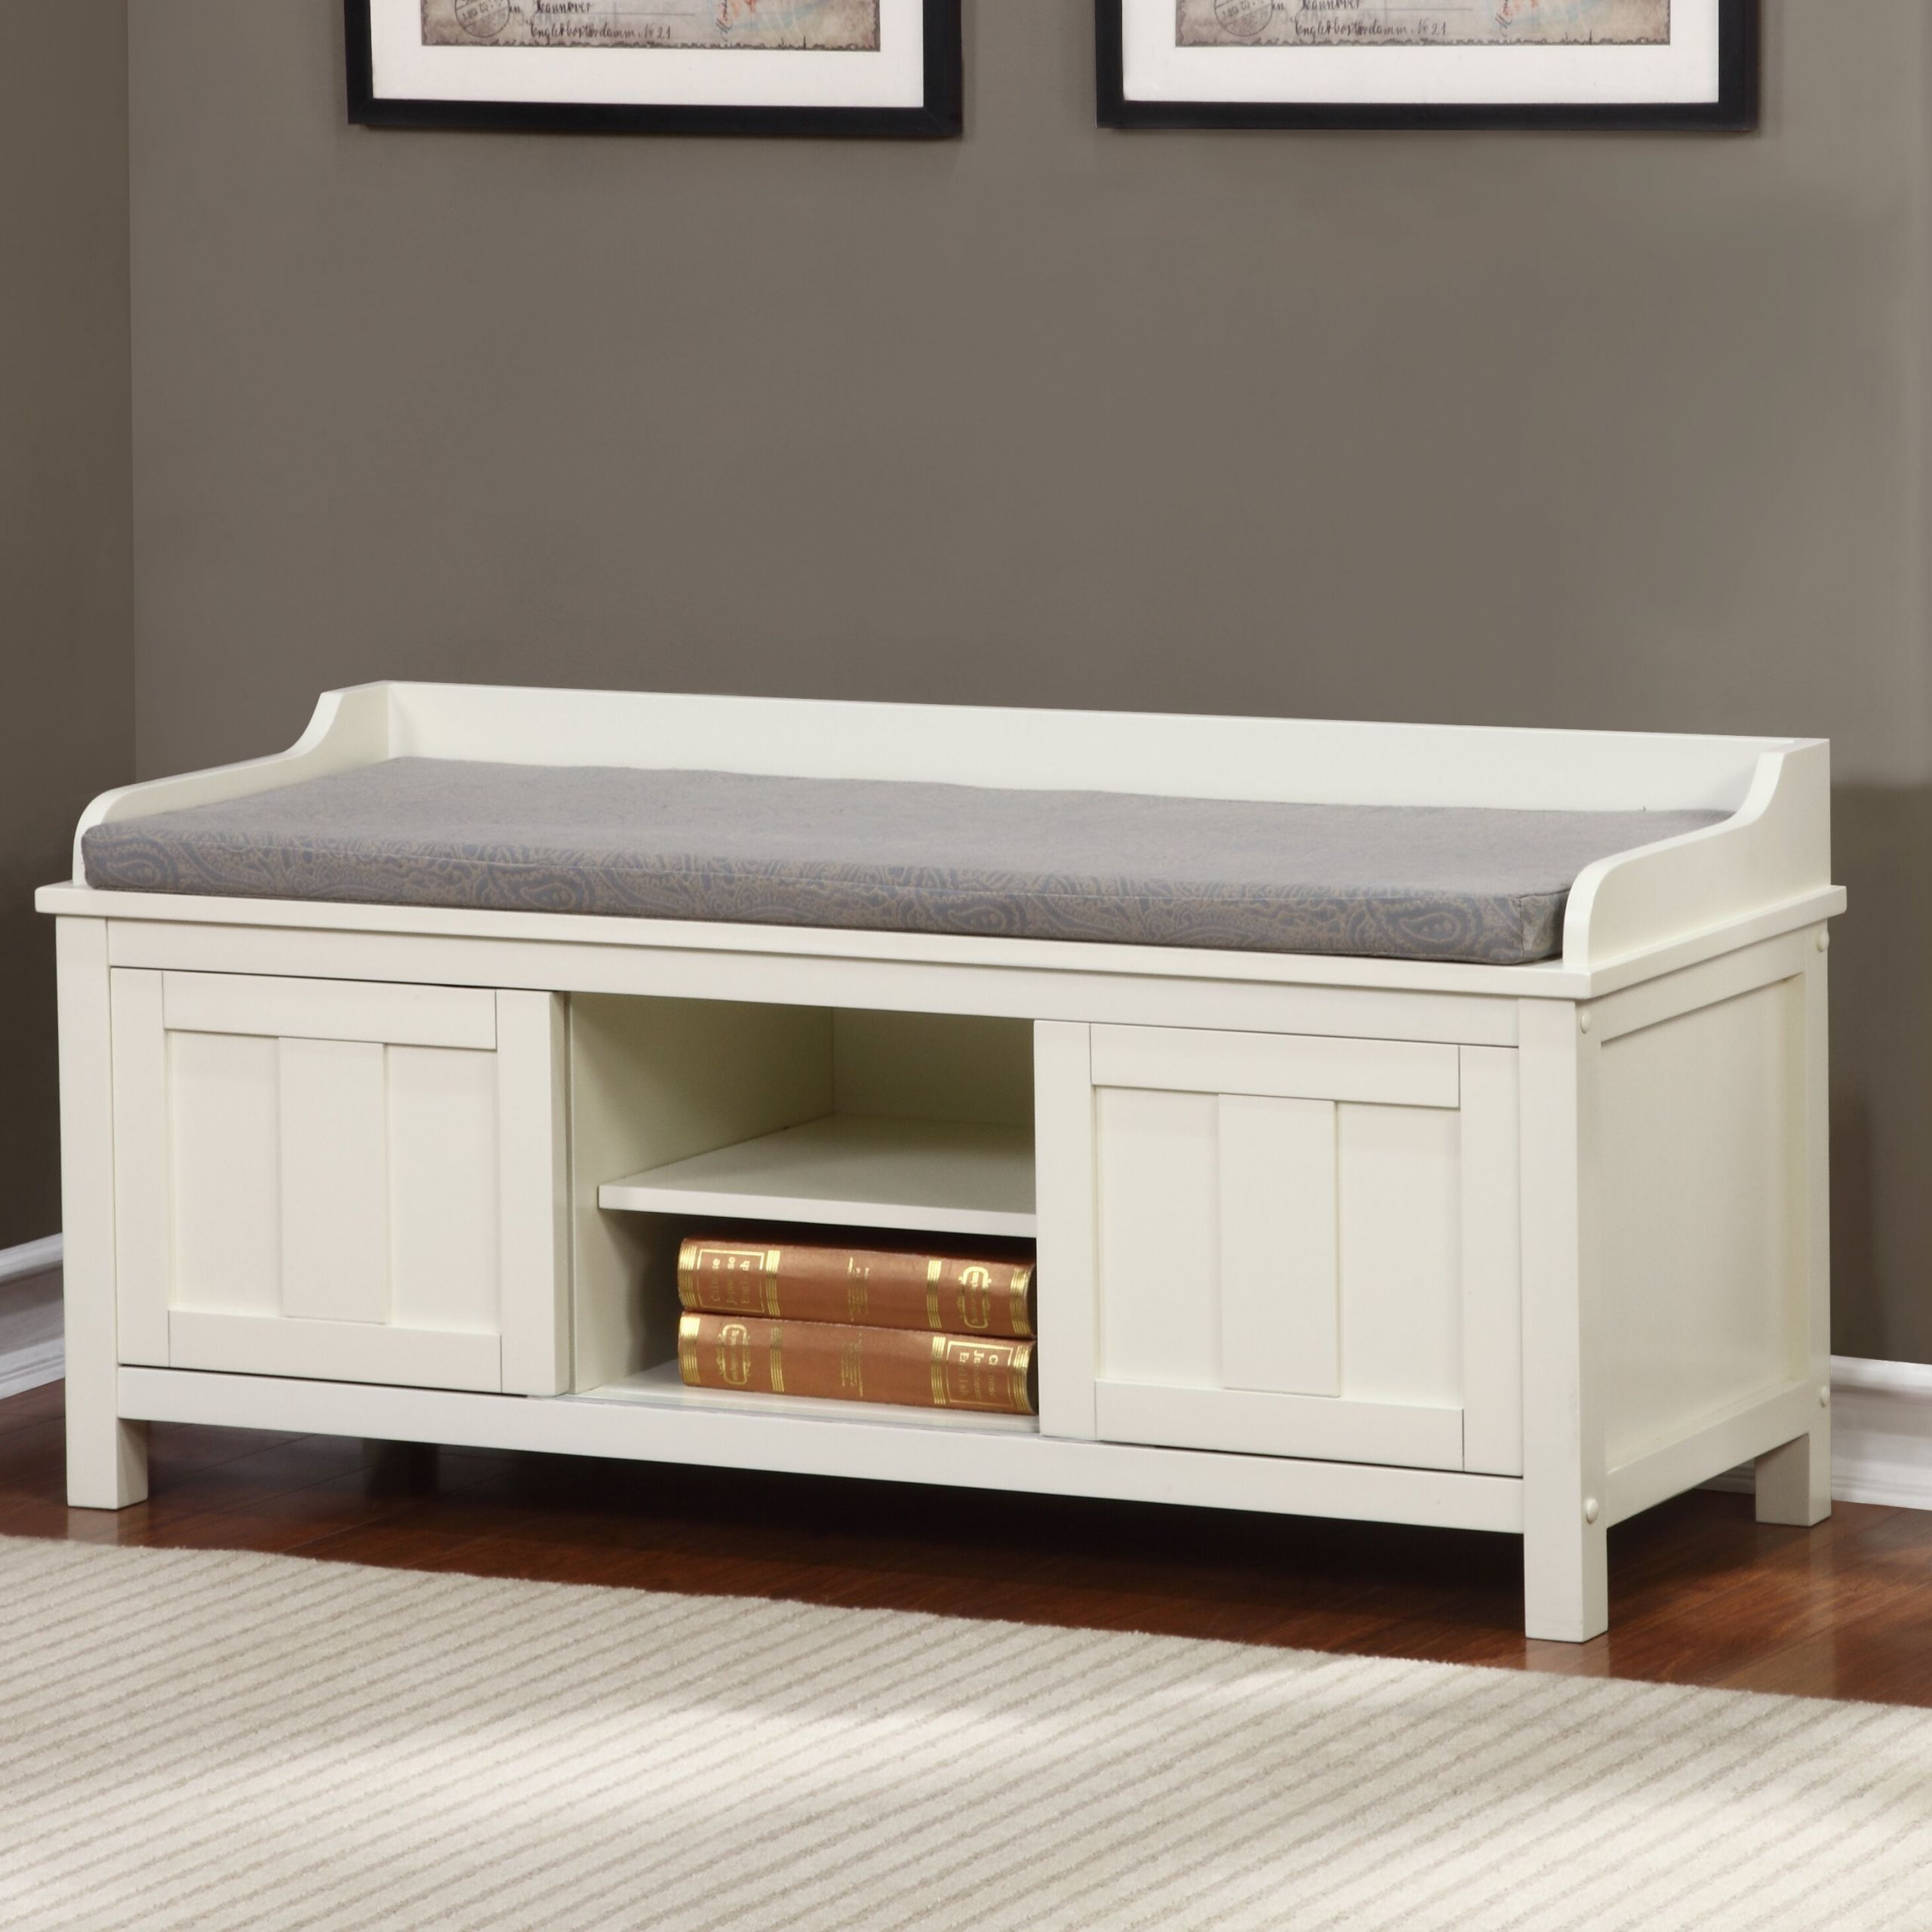 Entry Way Storage Bench
 Breakwater Bay Maysville Wood Storage Entryway Bench & Reviews